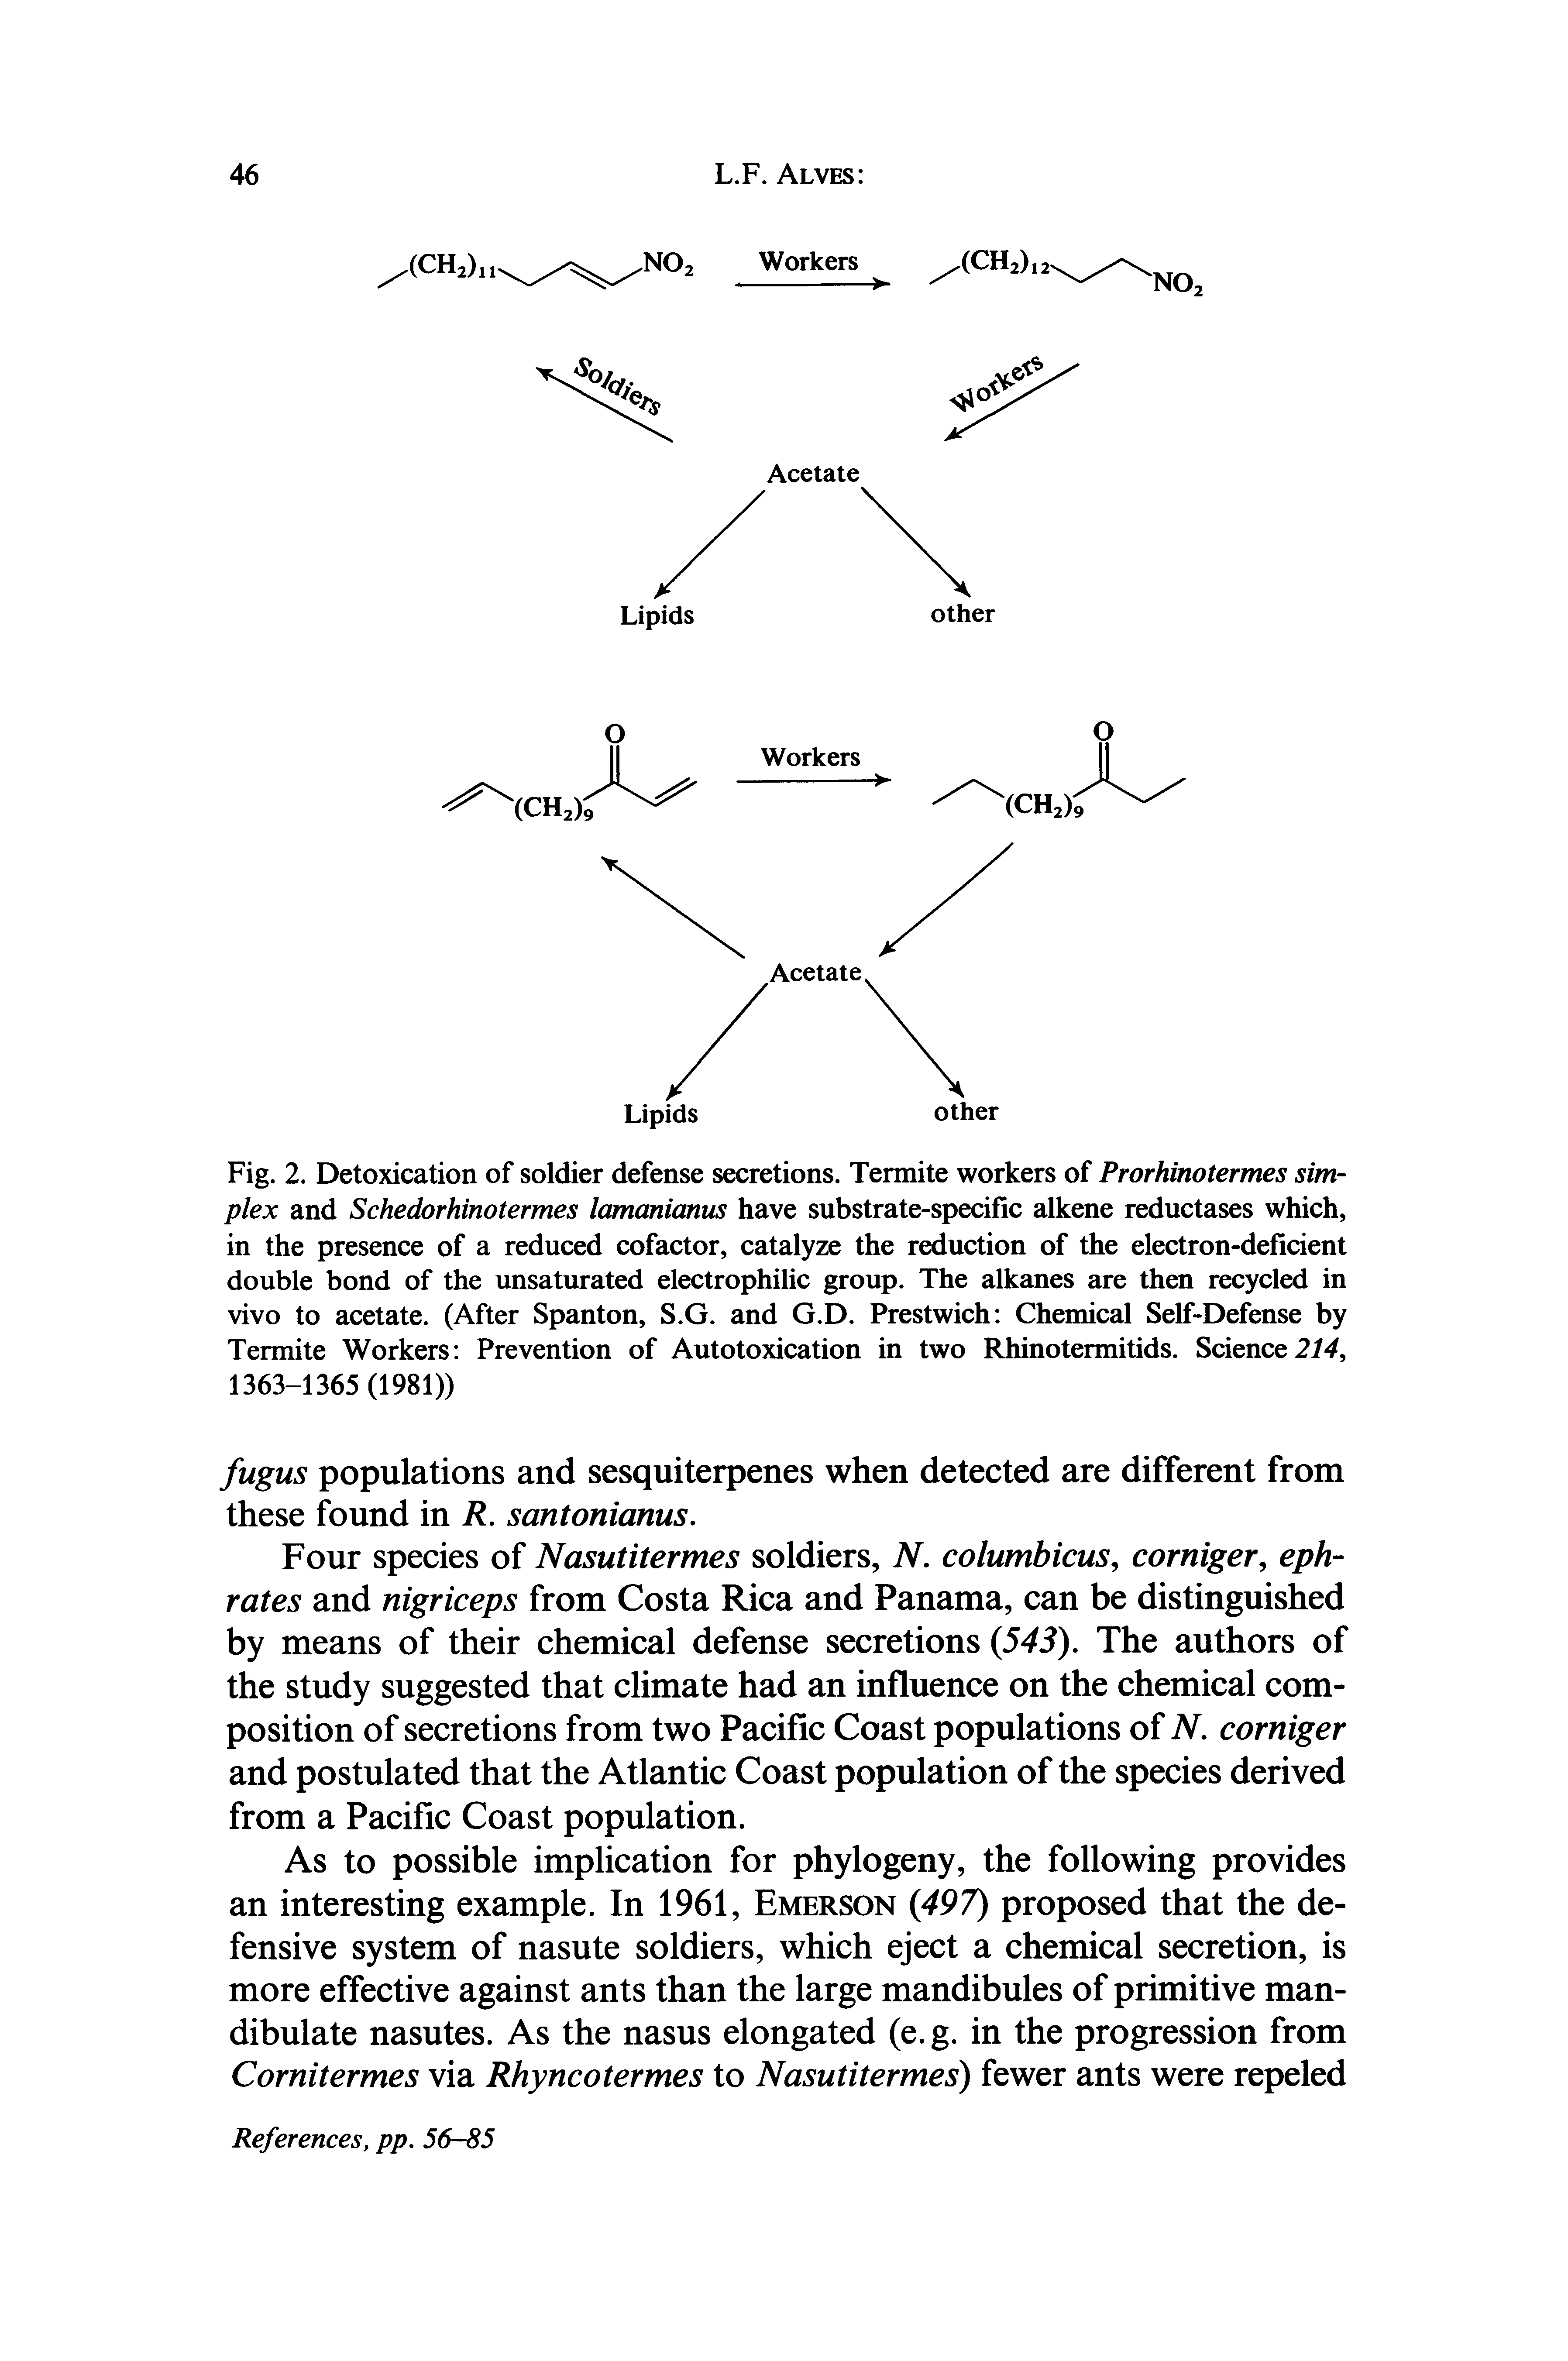 Fig. 2. Detoxication of soldier defense secretions. Termite workers of Prorhino ermessm plex and Schedorhinotermes lamanianus have substrate-specific alkene reduc ases w ic, in the presence of a reduced cofactor, catalyze the reduction of the electron e laent double bond of the unsaturated electrophilic group. The alkanes are then ret c in vivo to acetate. (After Spanton, S.G. and G.D. Prestwich Chemical Self De ense y Termite Workers Prevention of Autotoxication in two Rhinotermitids. Science 4, 1363-1365 (1981))...